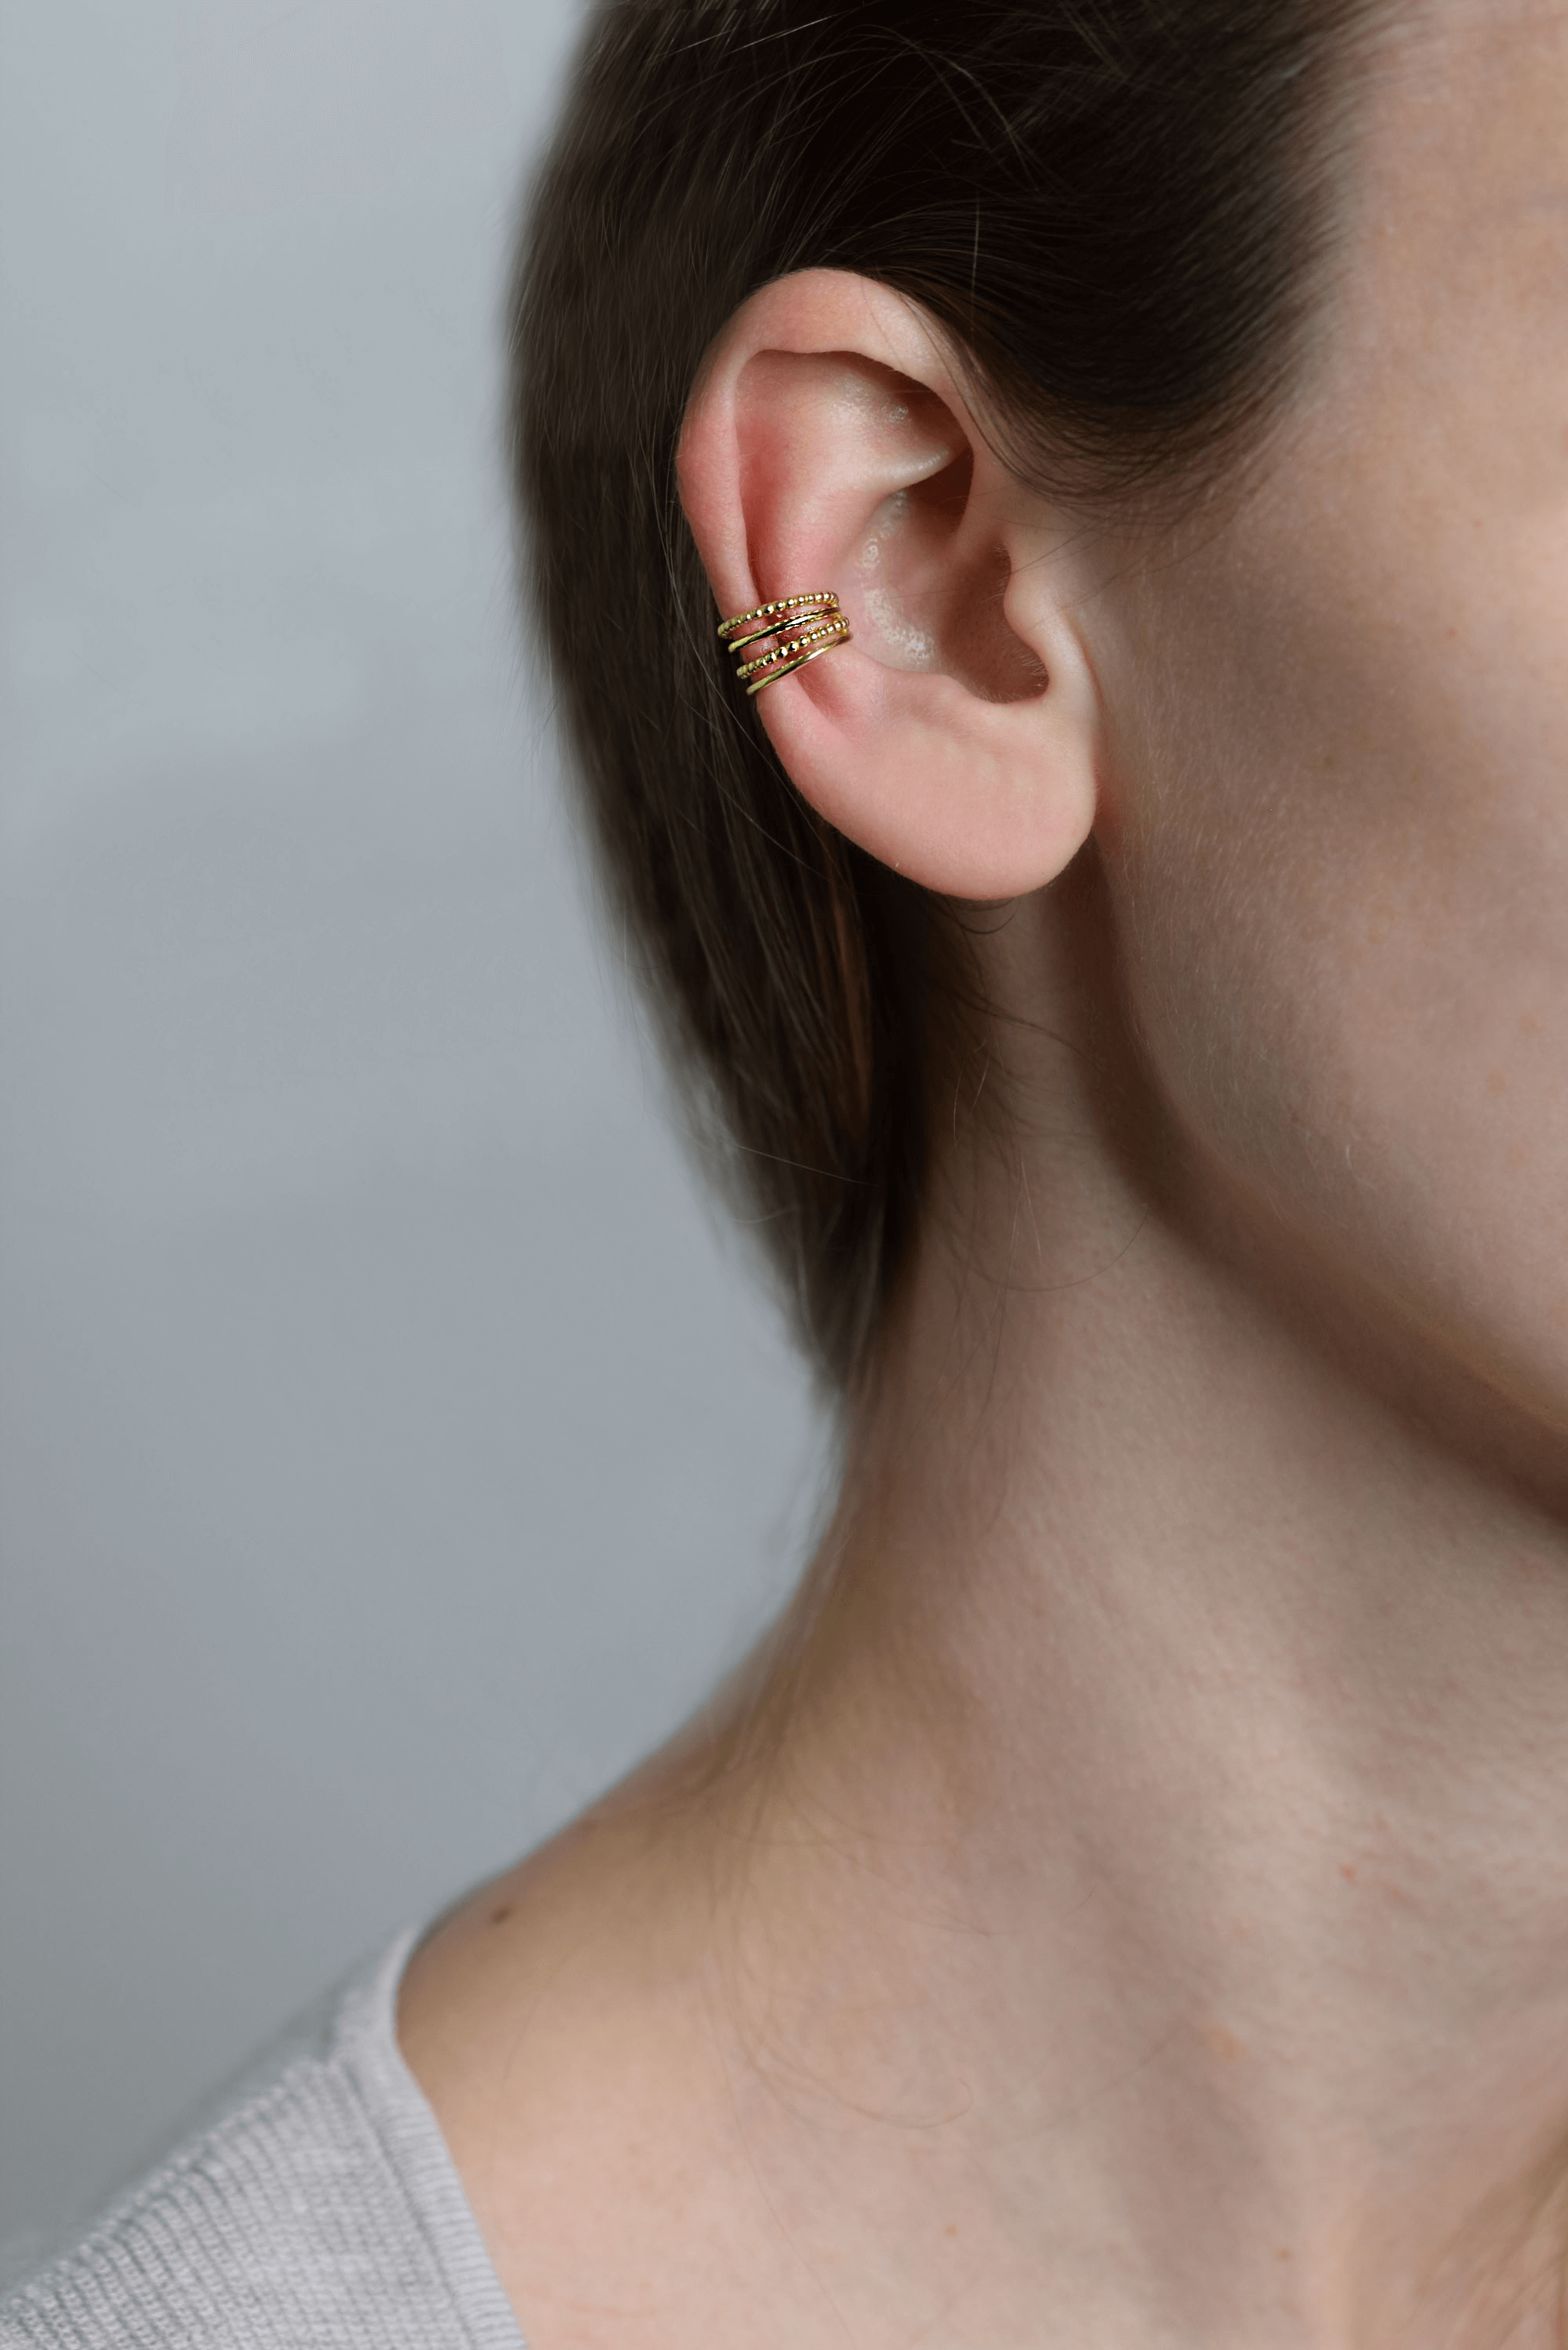 CHUNKY CONCH-GROß EAR CUFF- 925 Sterling Silber Ohrklemme 